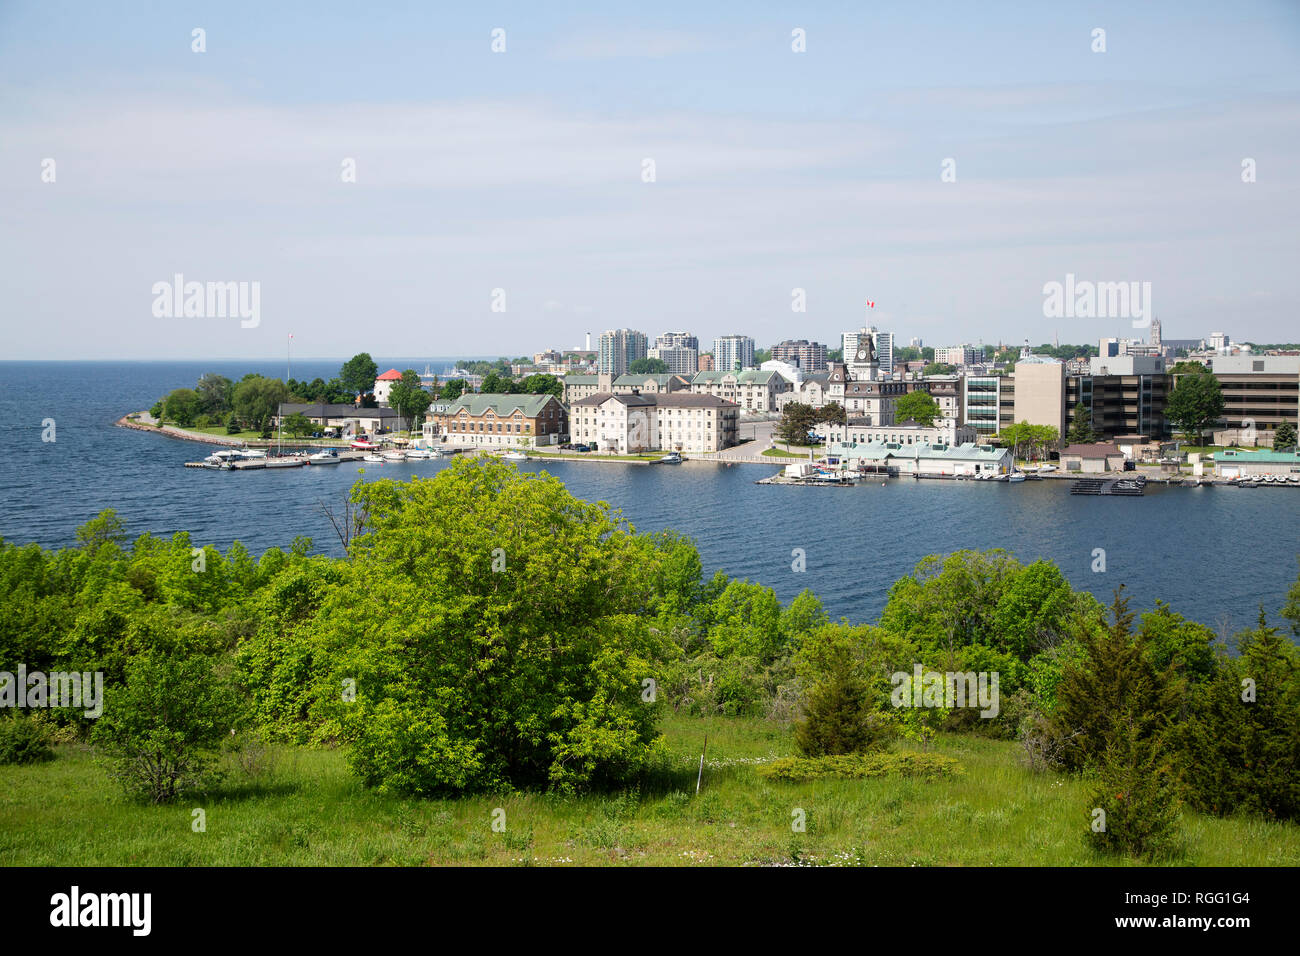 The waterfront of Kingston, Ontario. Kingston overlooks the Saint Lawrence River and is at the confluence with the Rideau Canal. Stock Photo